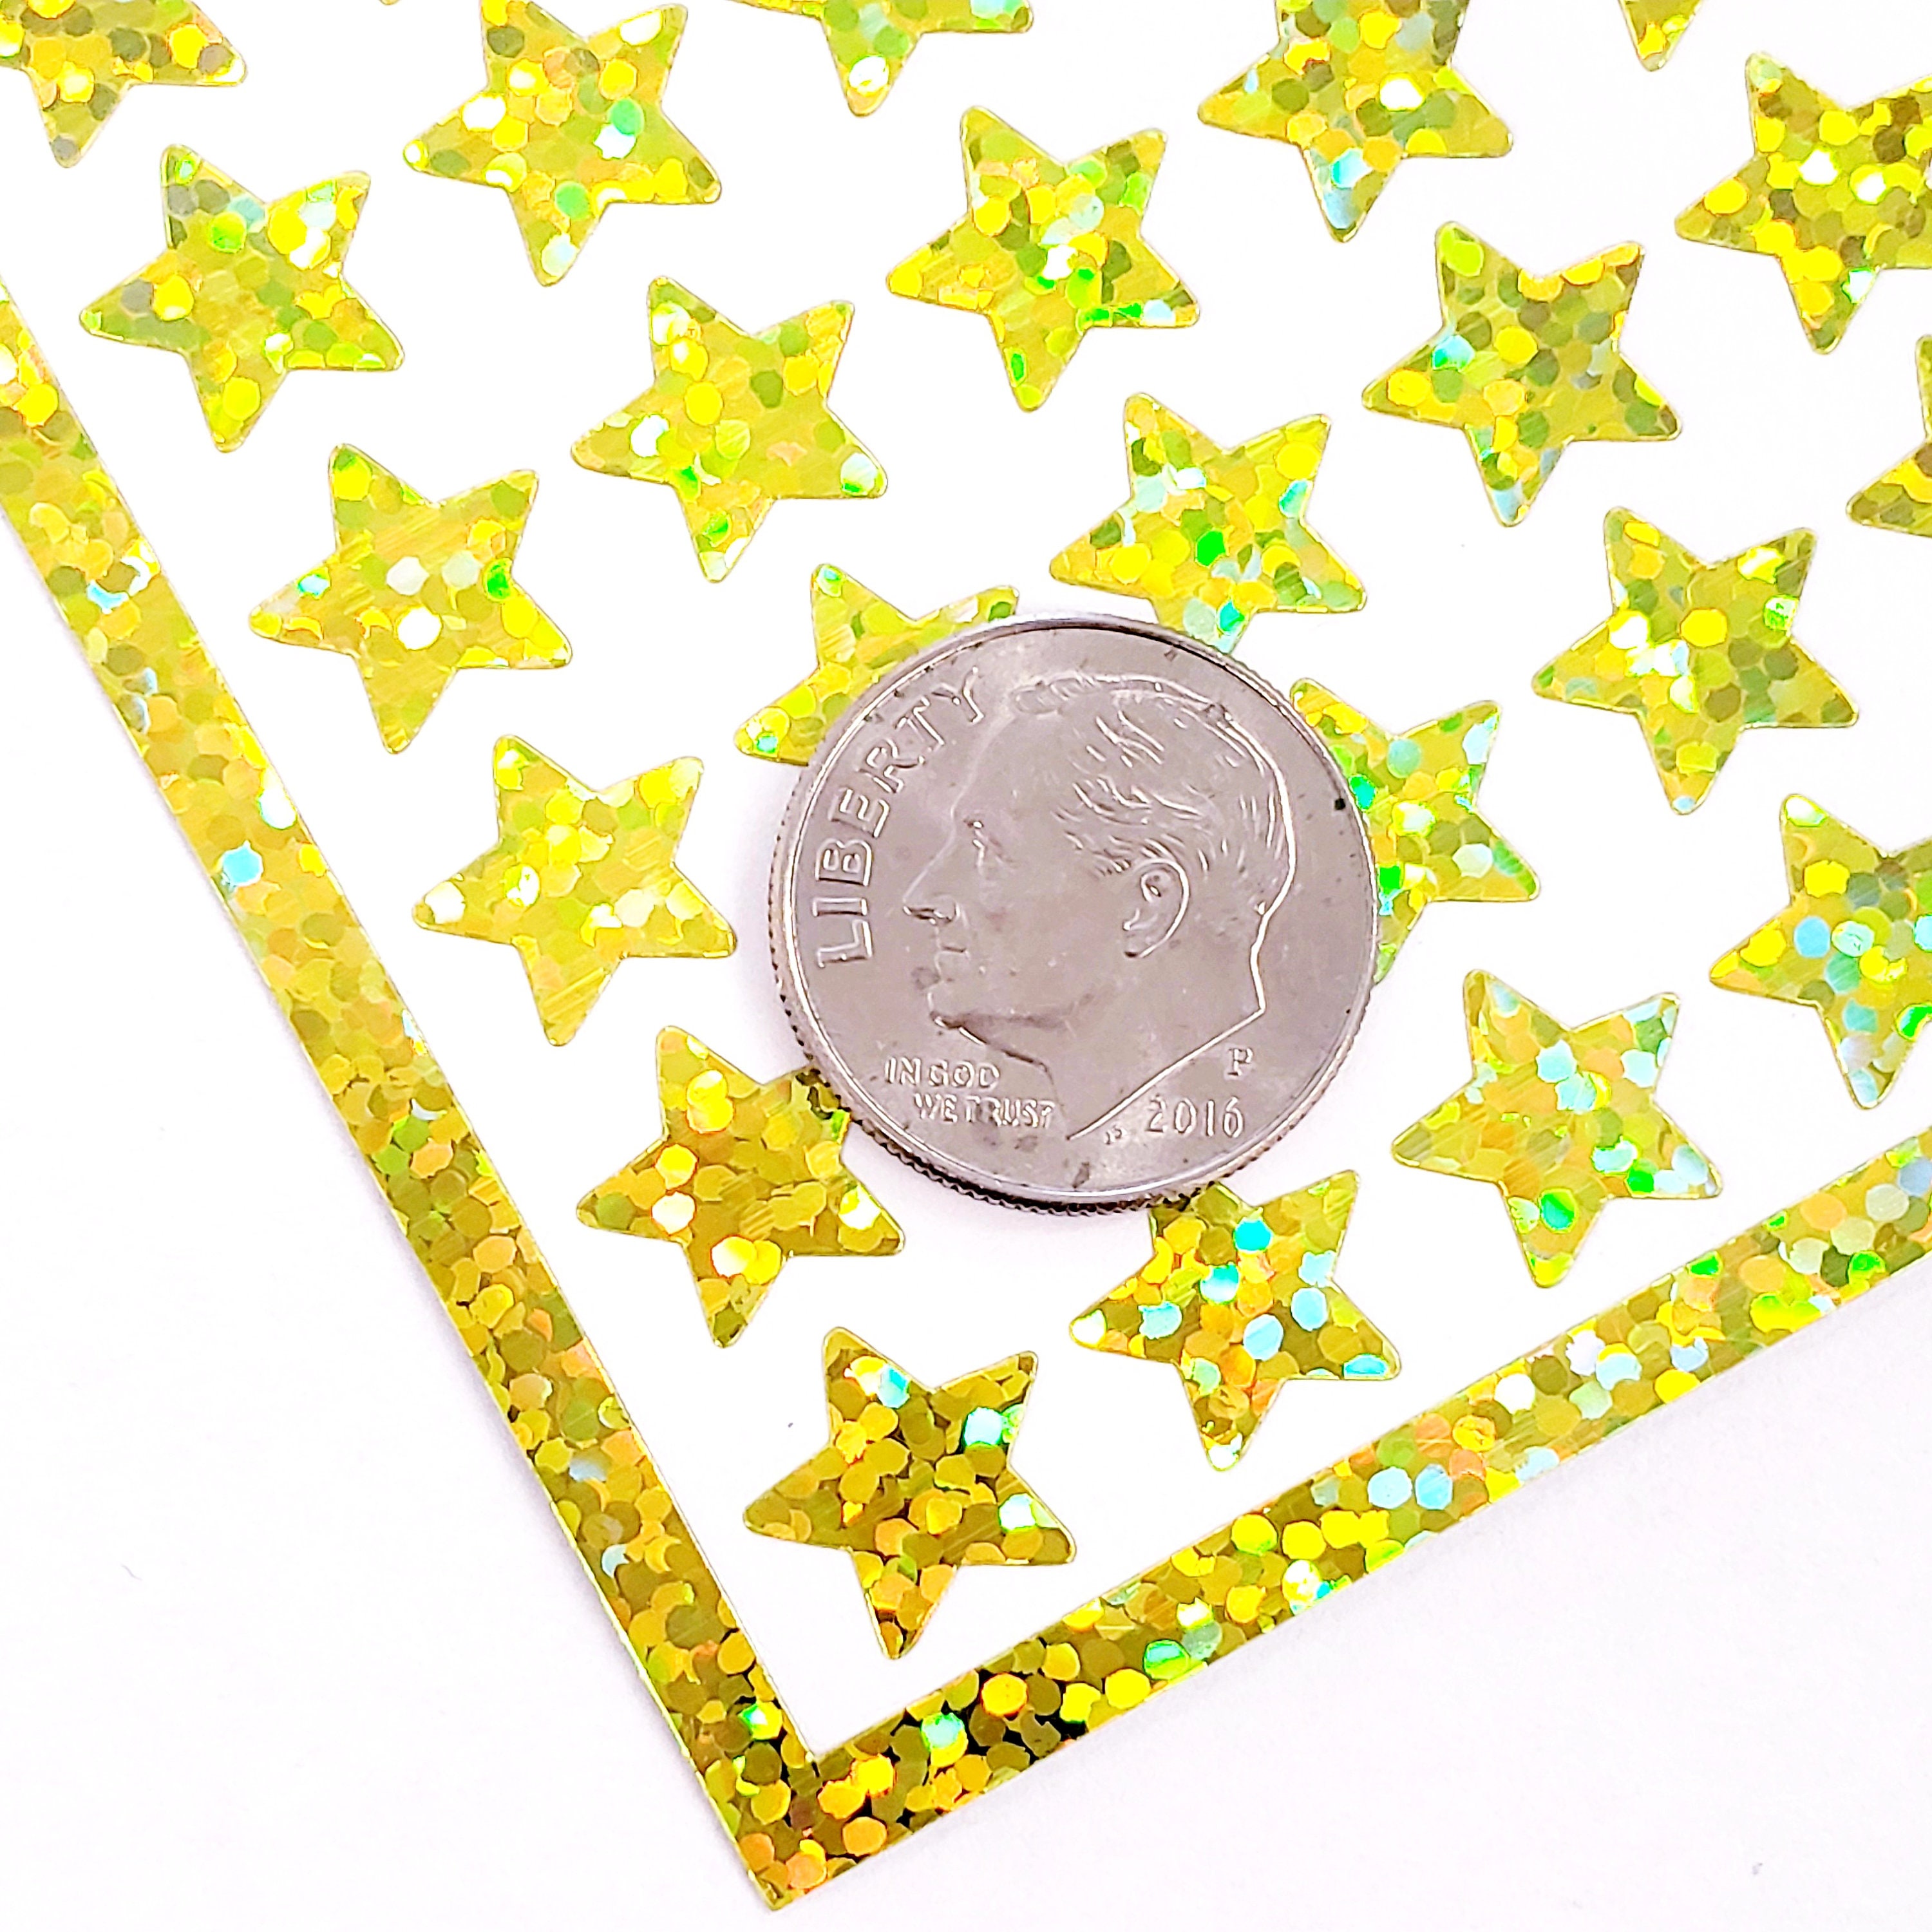 Gold Stars Sticker Sheet, Set of 192 Small Mirror Gold Star Stickers for  Wedding Meal Choice Cards, Goal and Reward Charts and Journals. 